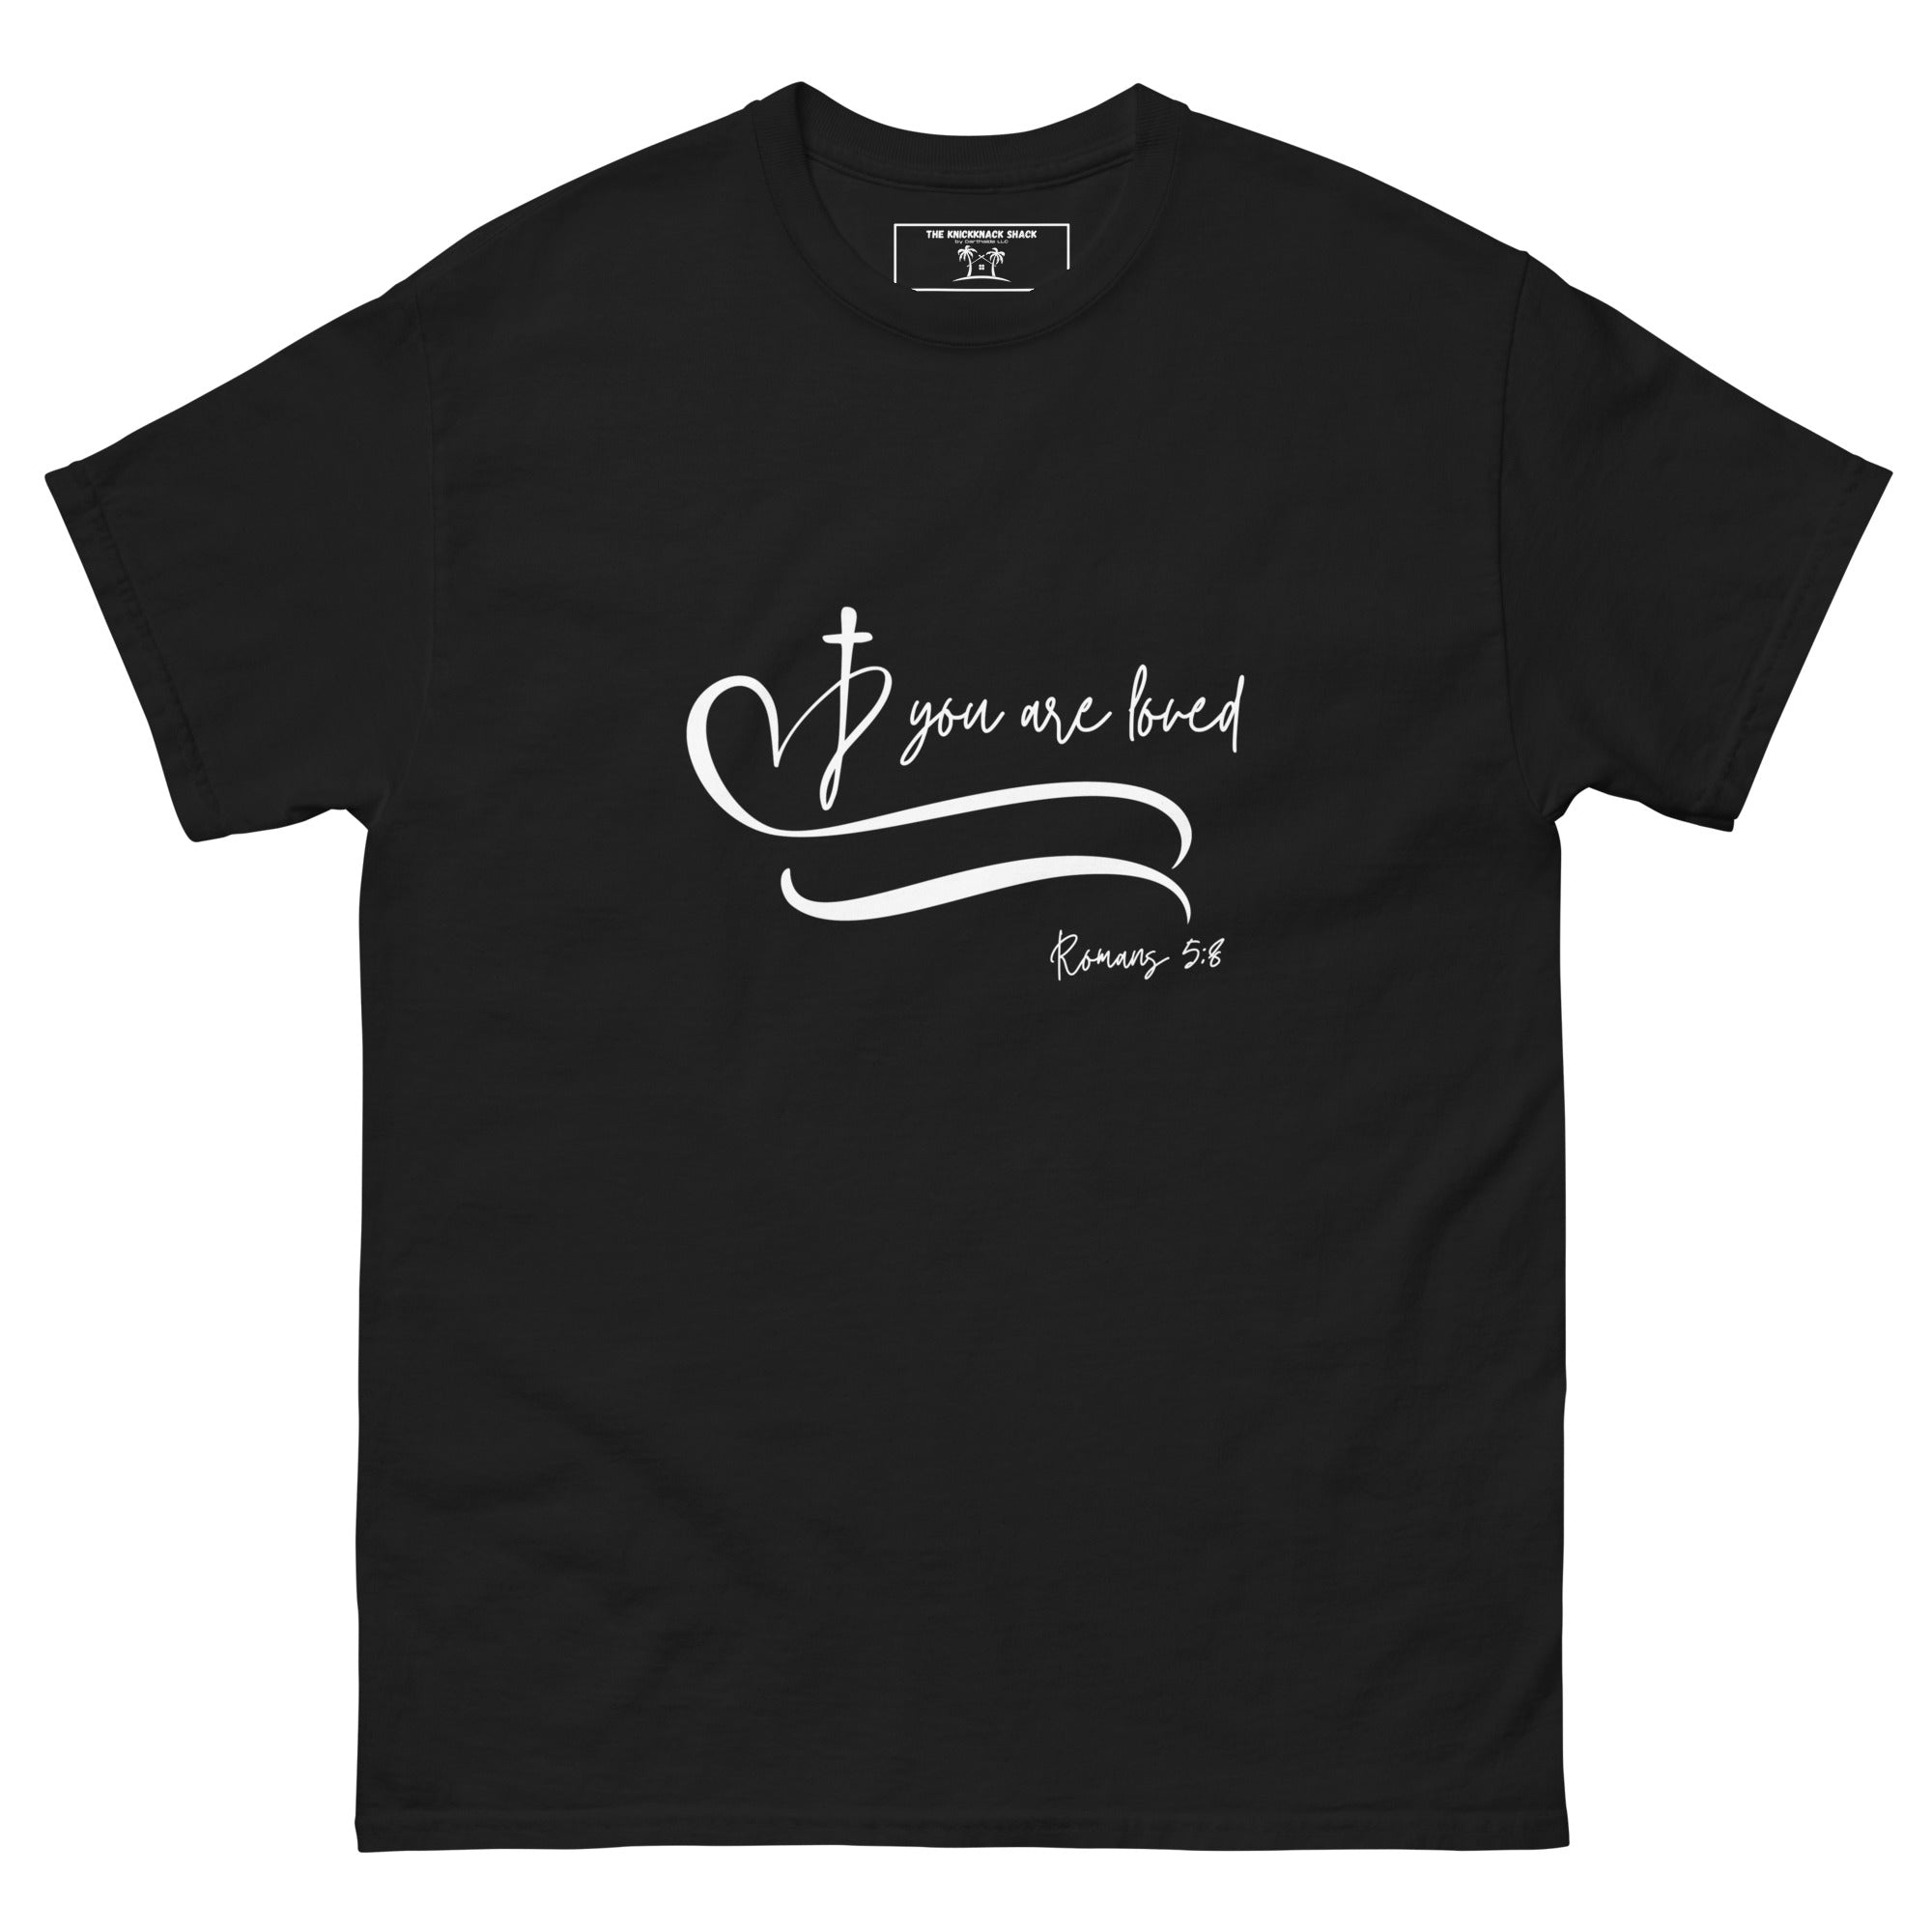 Tee-shirt classique - Loved (couleurs sombres)